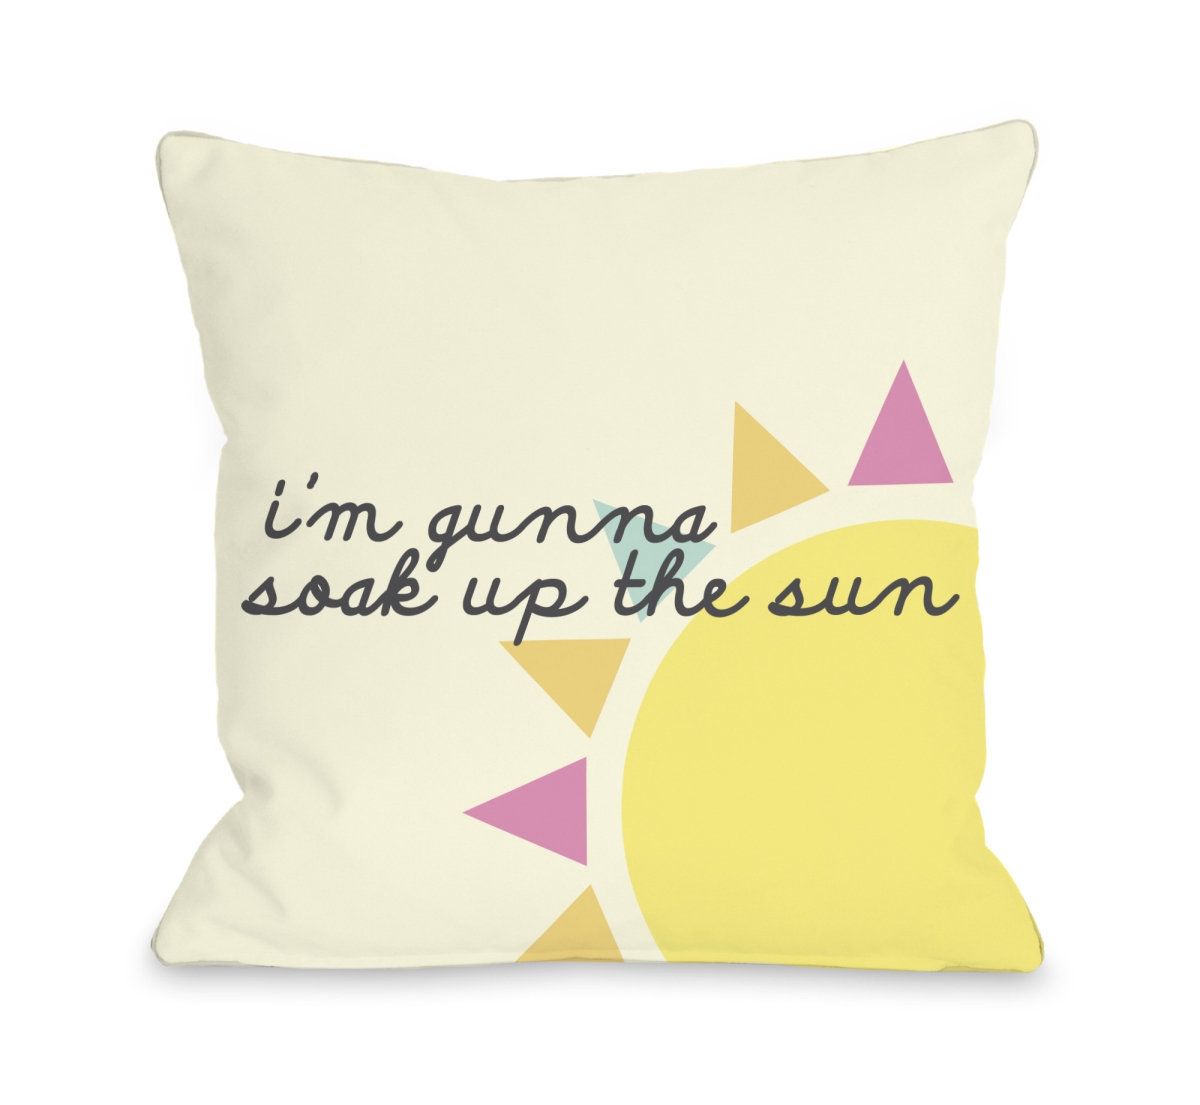 72252pl16 16 X 16 In. Soak Up The Sun Pillow, Yellow